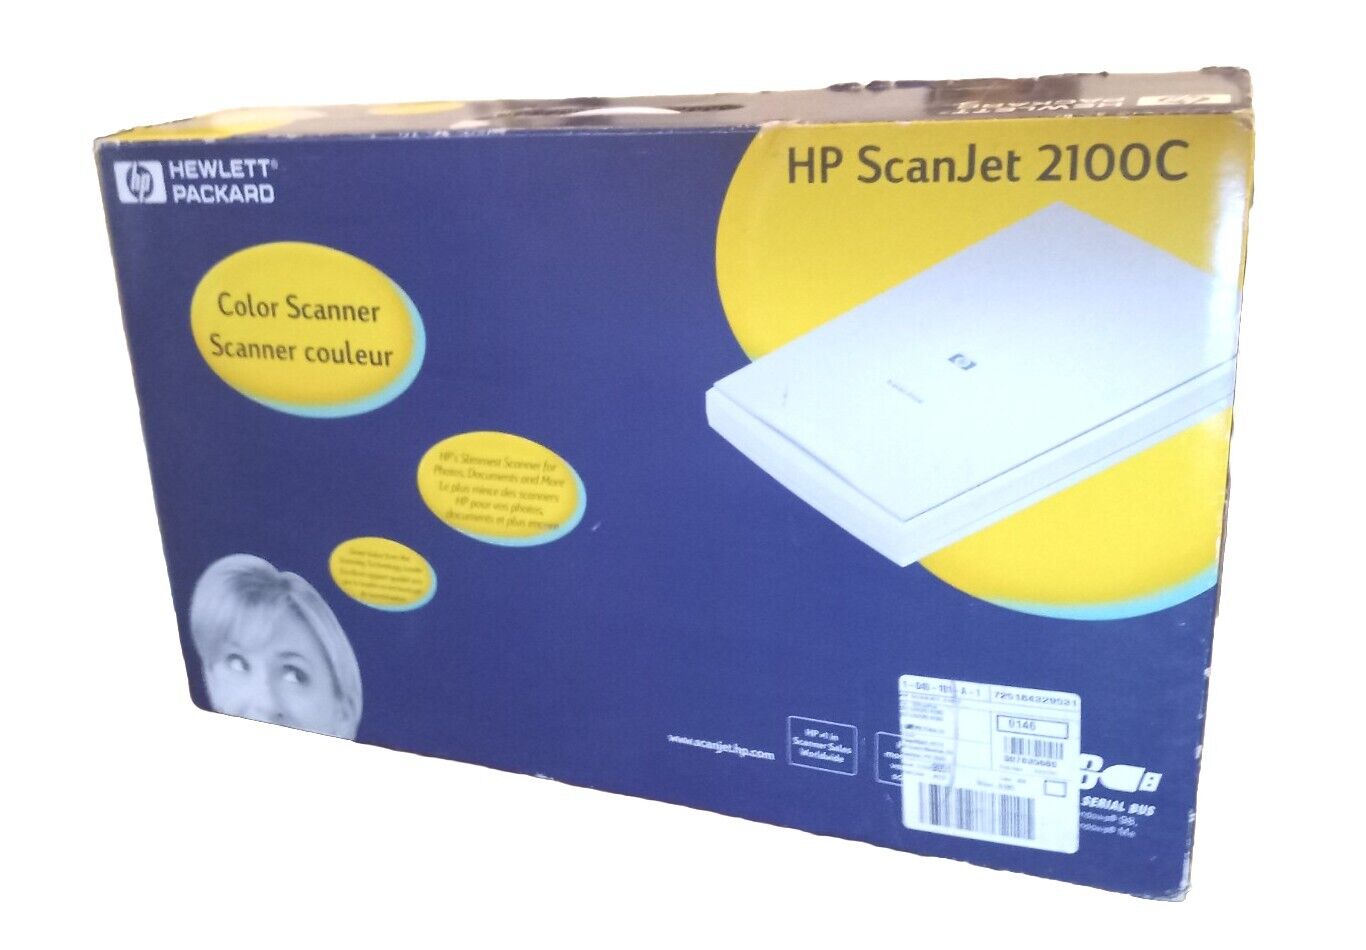 RARE HP Hewlett-Packard ScanJet 2100C Color Scanner NEW OPEN BOX Software Cables